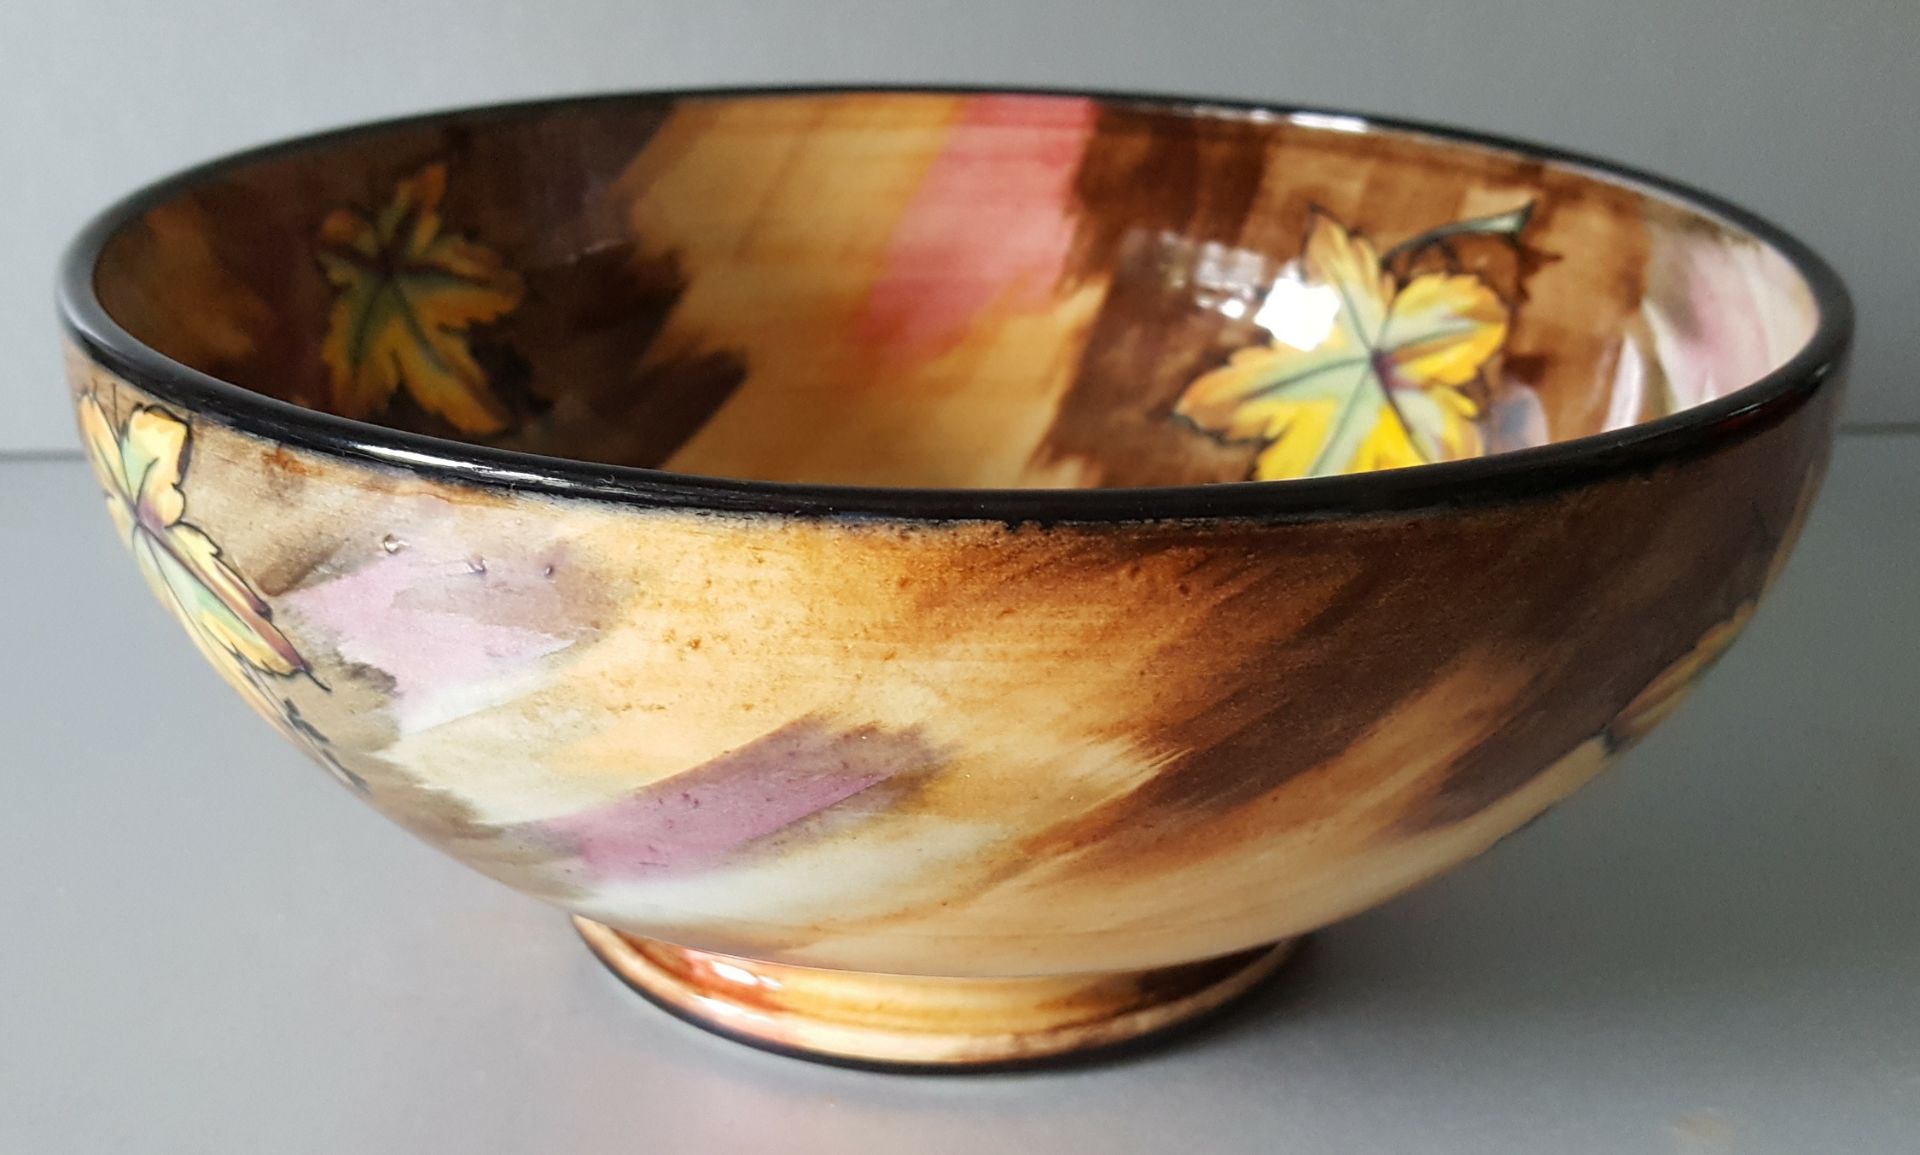 Vintage Retro H & K Tunstall Pottery Bowl Autumn Tints Hand Painted Early 20th Century No Reserve - Image 2 of 3